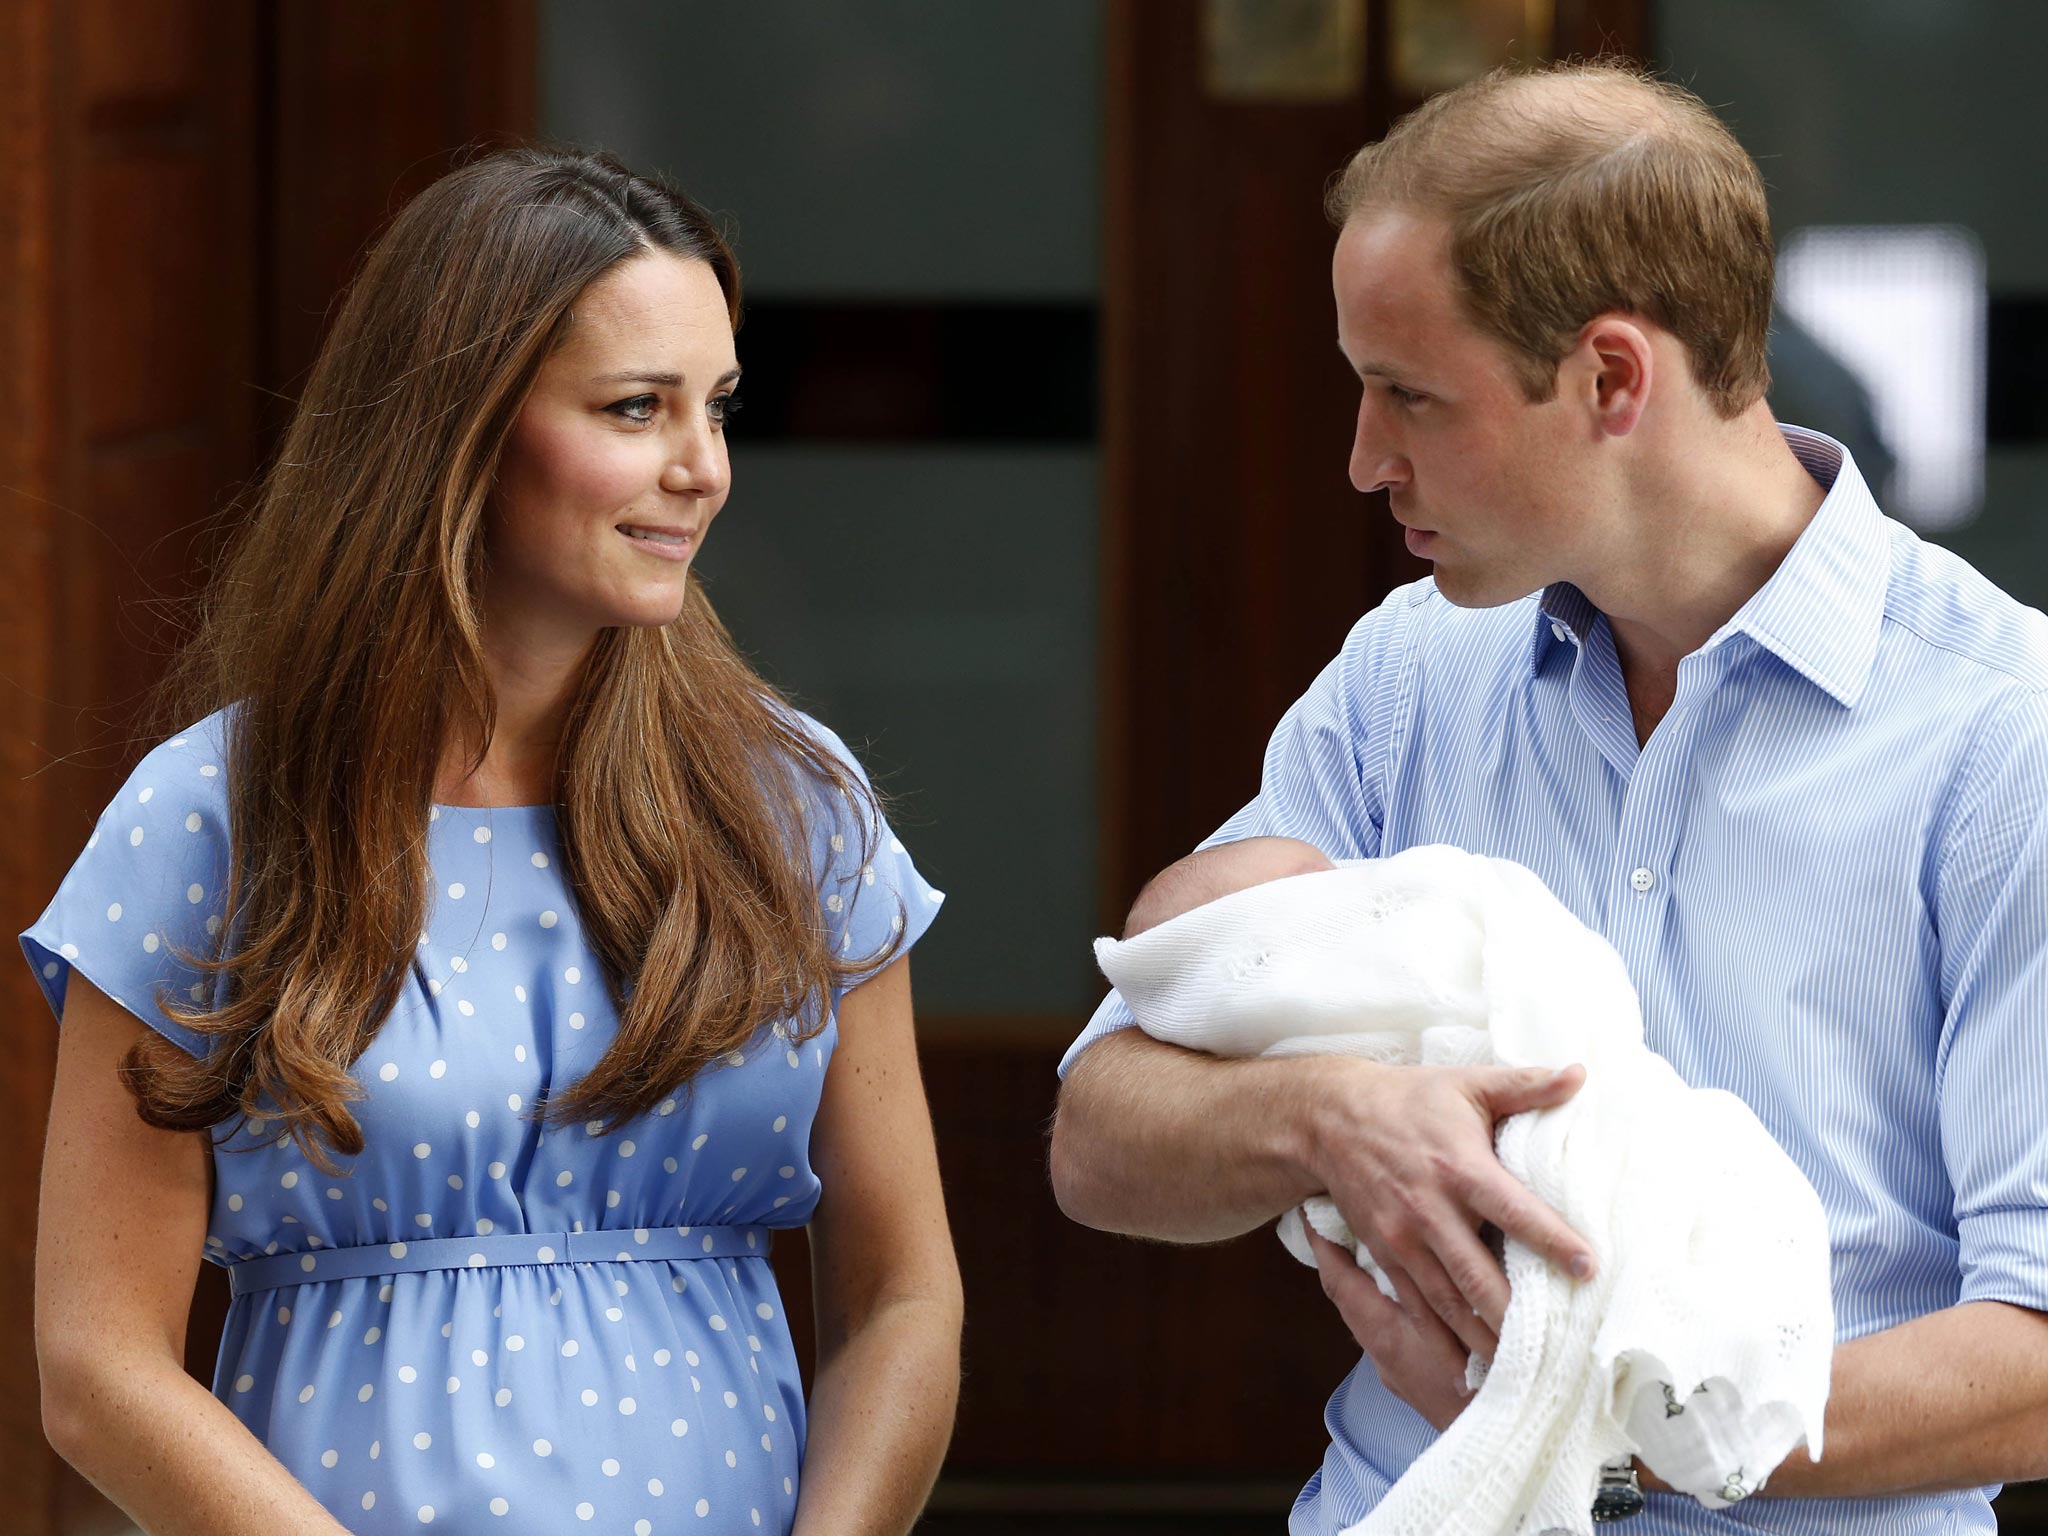 The Duke and Duchess of Cambridge hold Prince George as he makes his first public appearance in July 2013